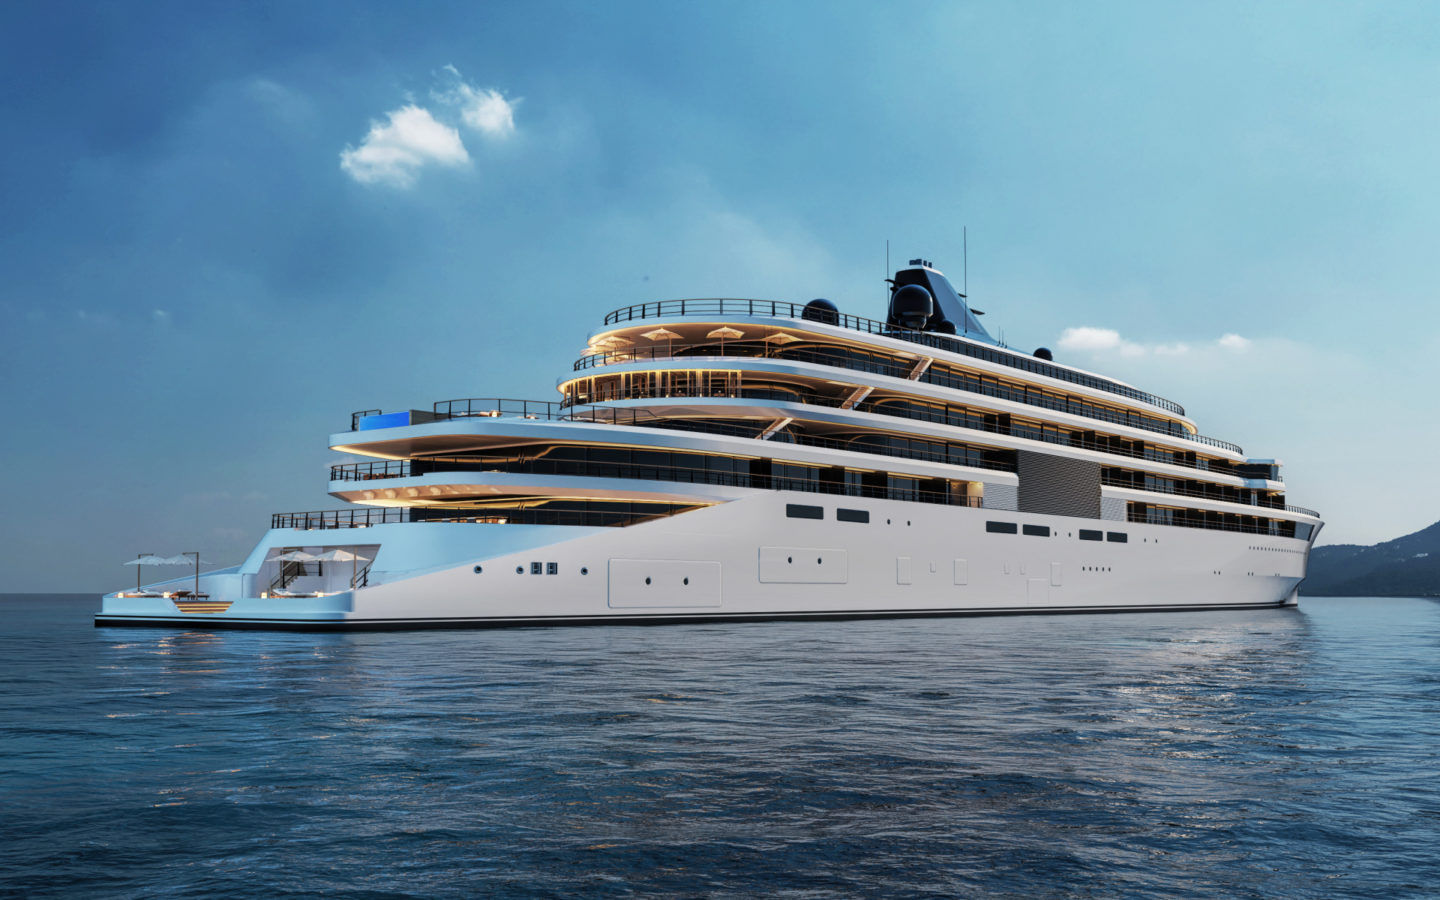 Aman Hotel Group Will Welcome Guests Onboard Its Most Luxurious Cruiseliner in 2025